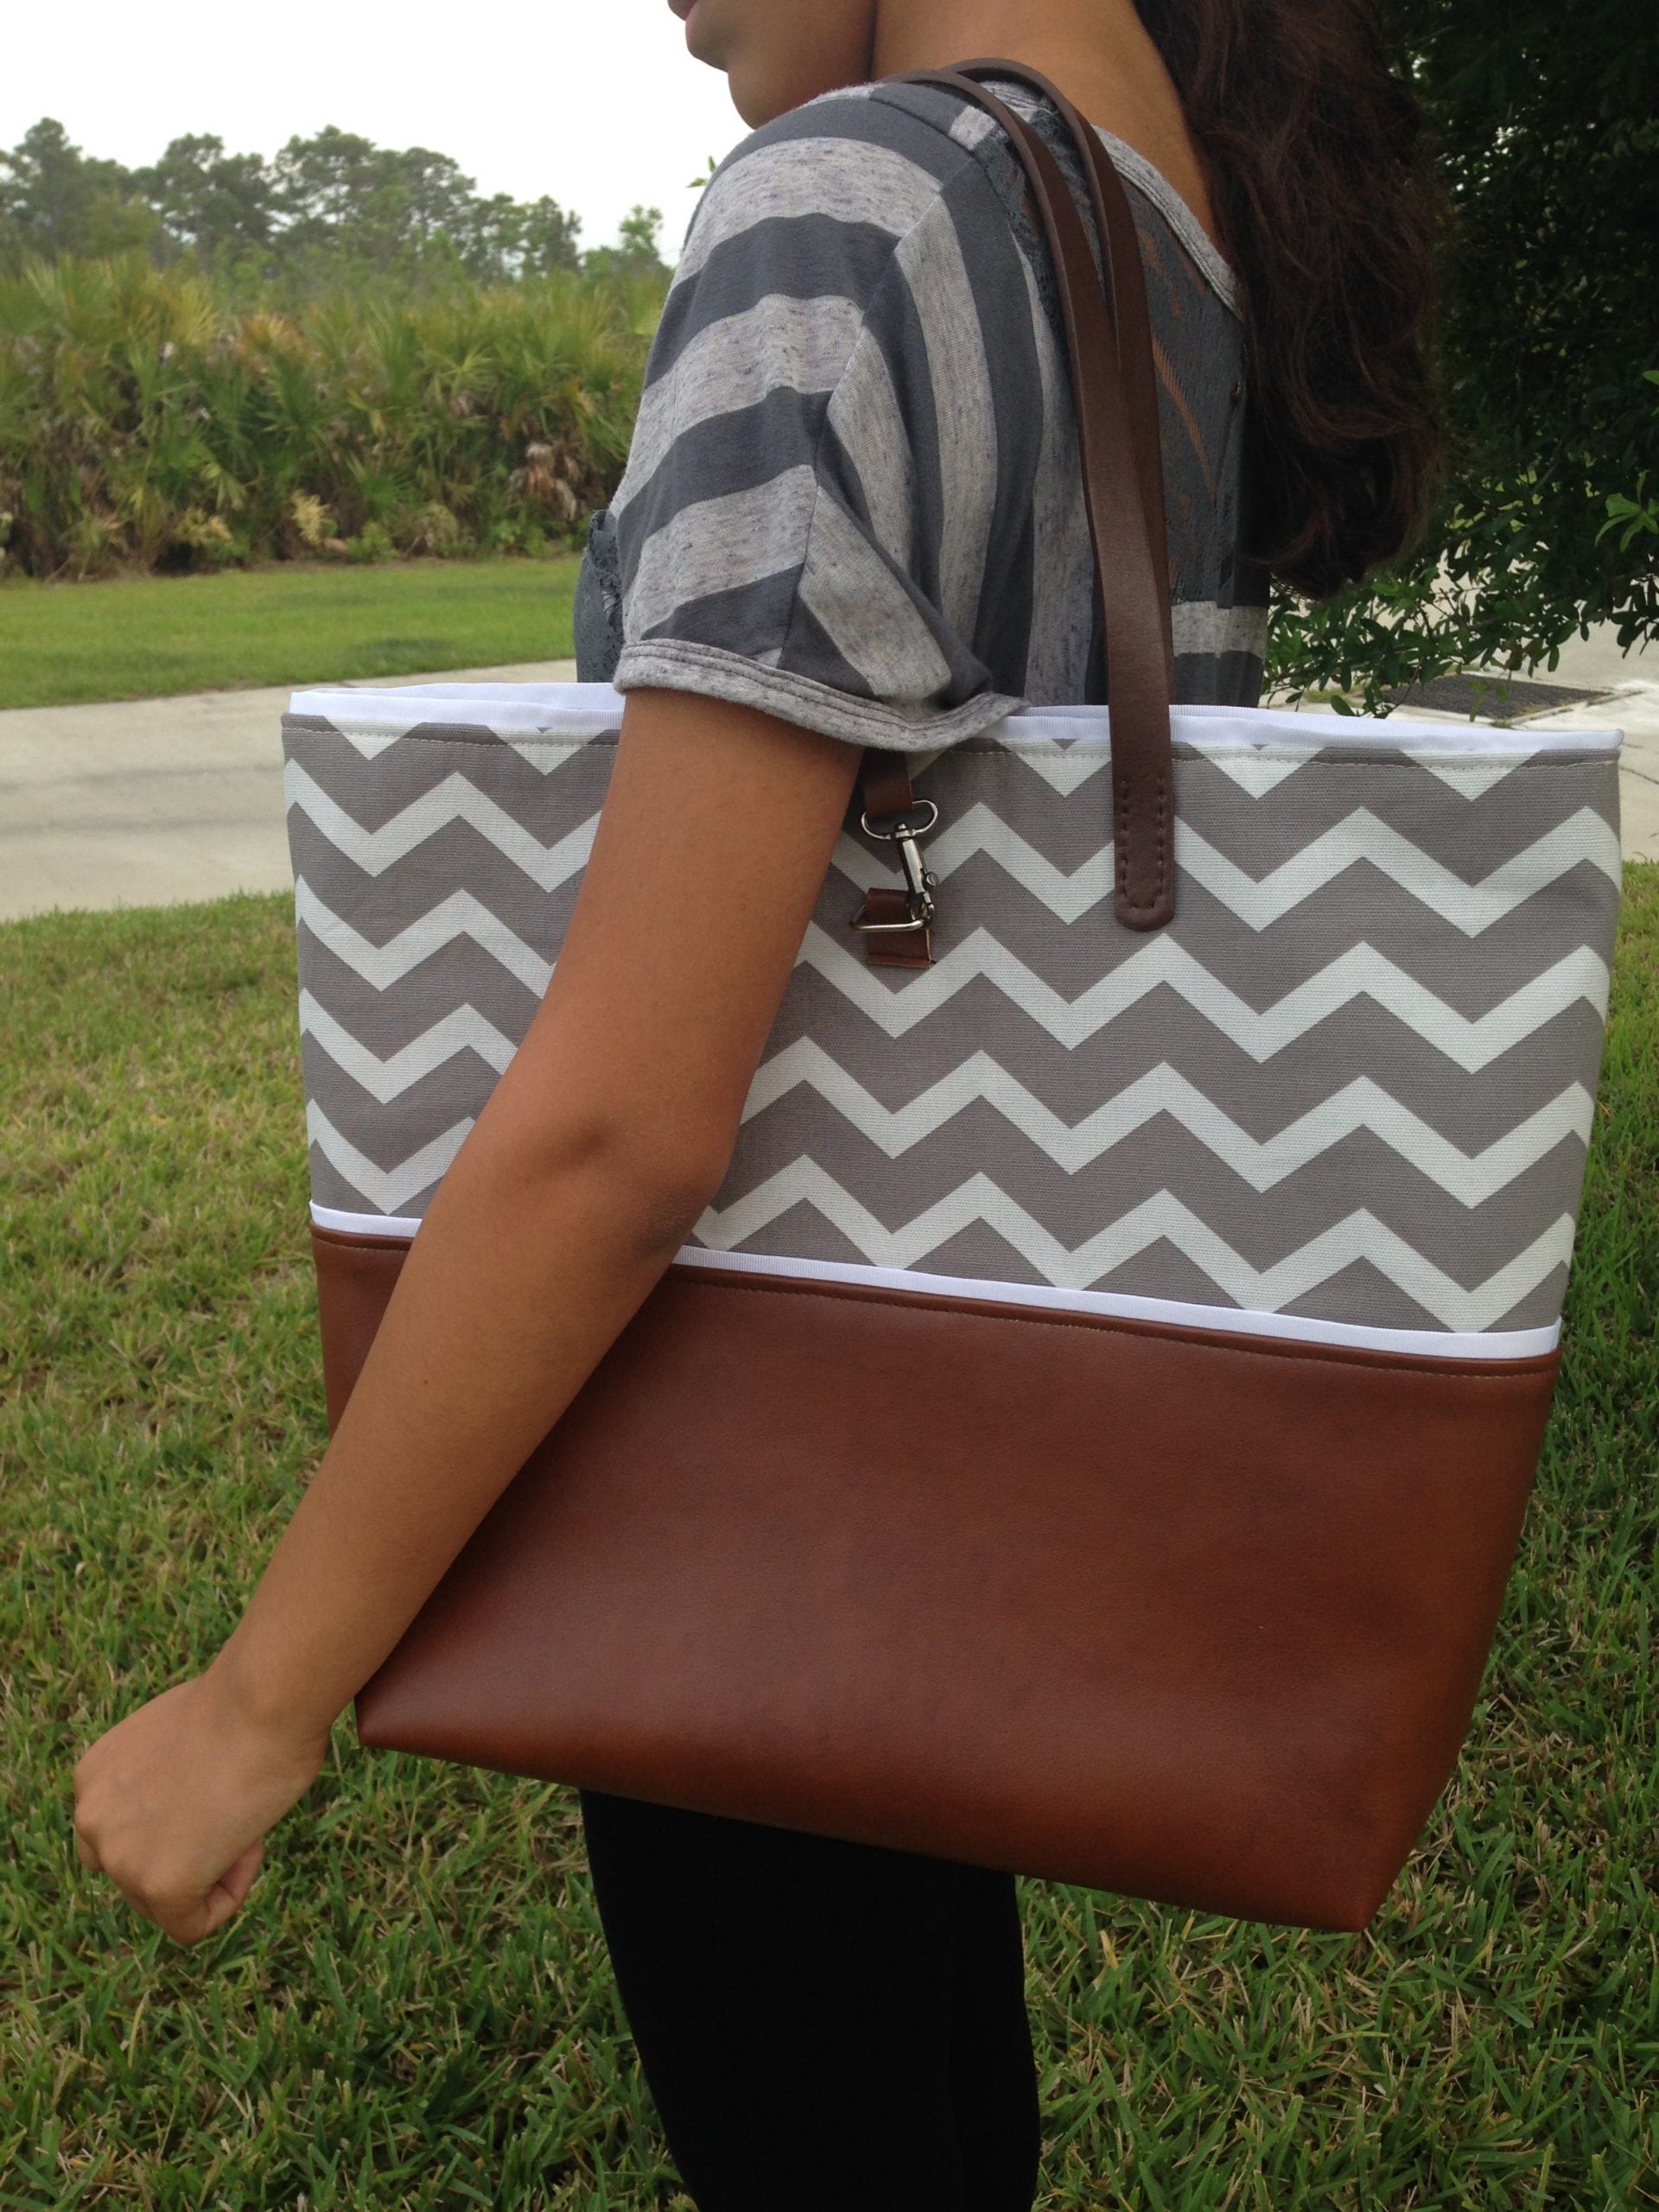 Chevron-and-Leather-Tote-in-Gray-WandaLopezDesigns-modeled